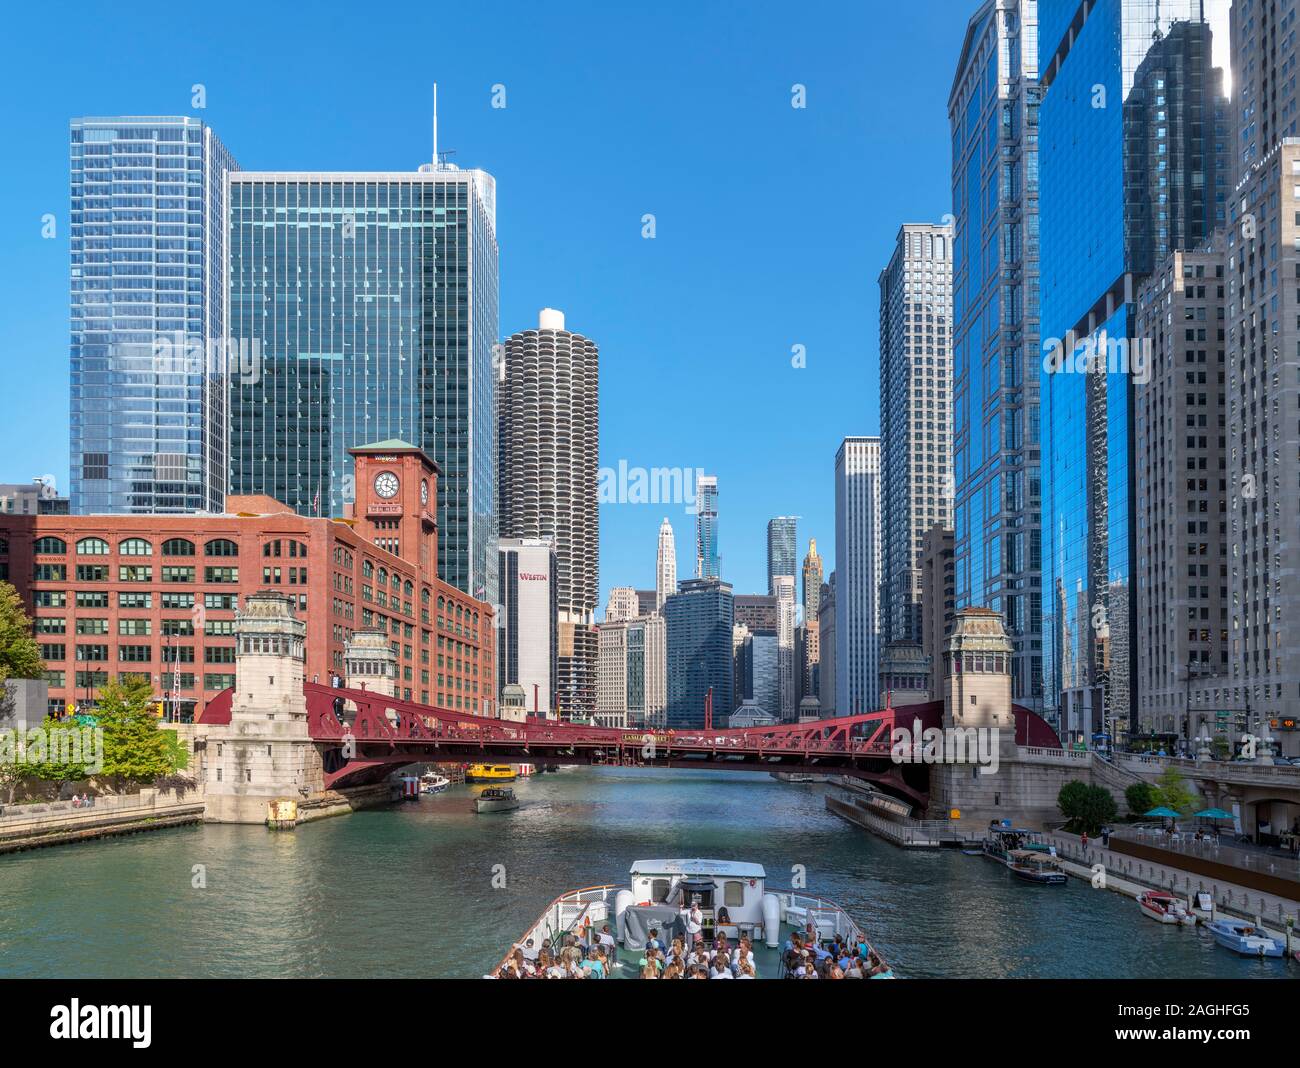 River cruise boat on the Chicago River with the city skyline behind, viewed from Wells Street Bridge, Chicago, Illinois, USA Stock Photo